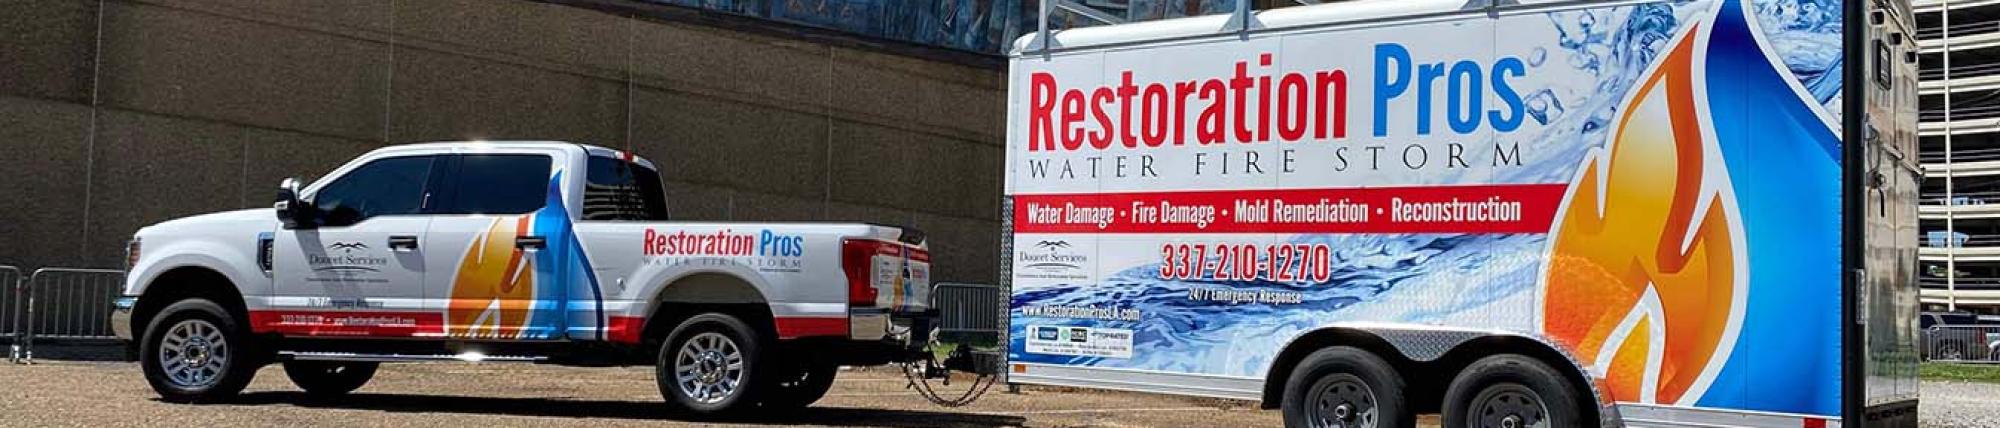 image of water mitigation company truck